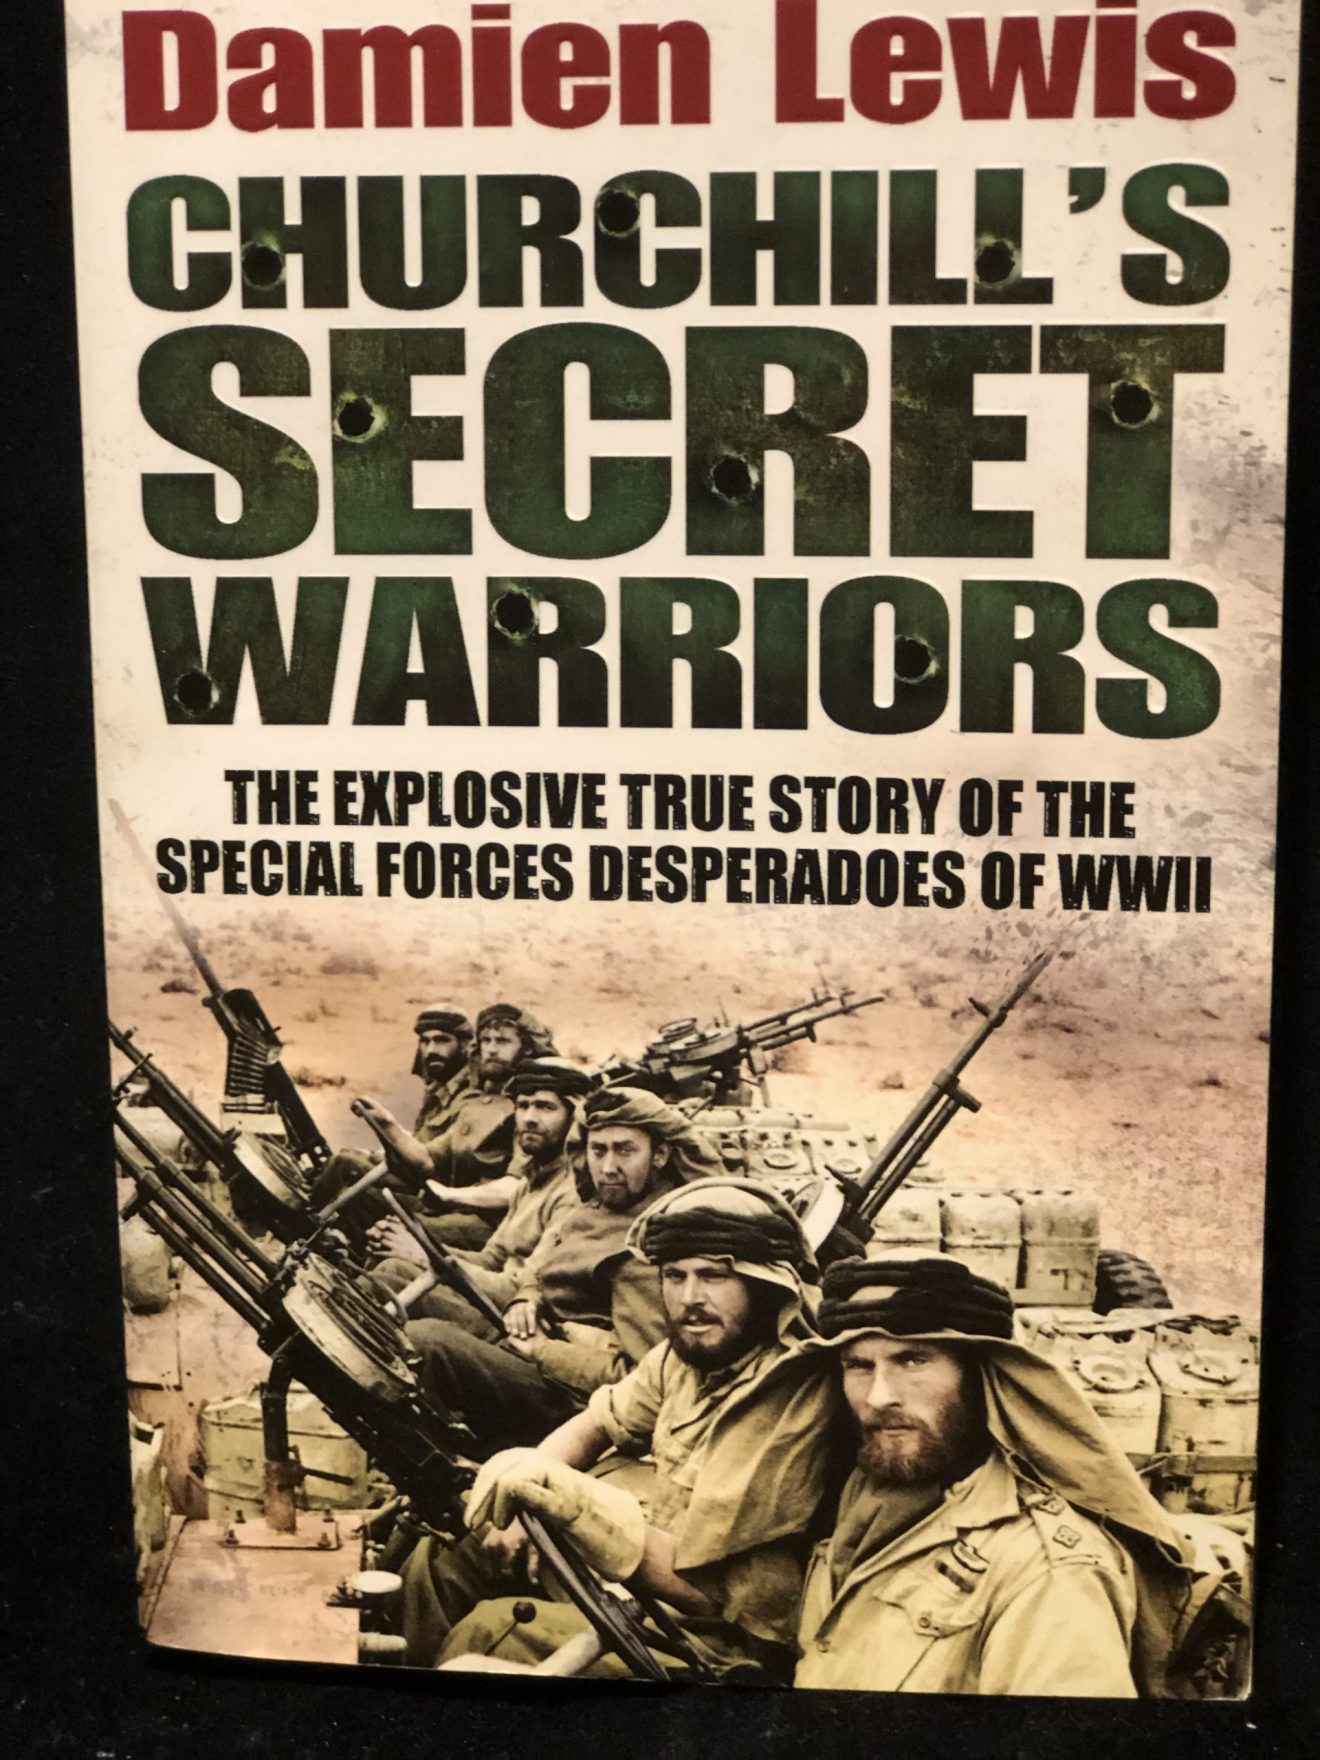 Churchill #39 s Secret Warriors: The Explosive True Story of the Special